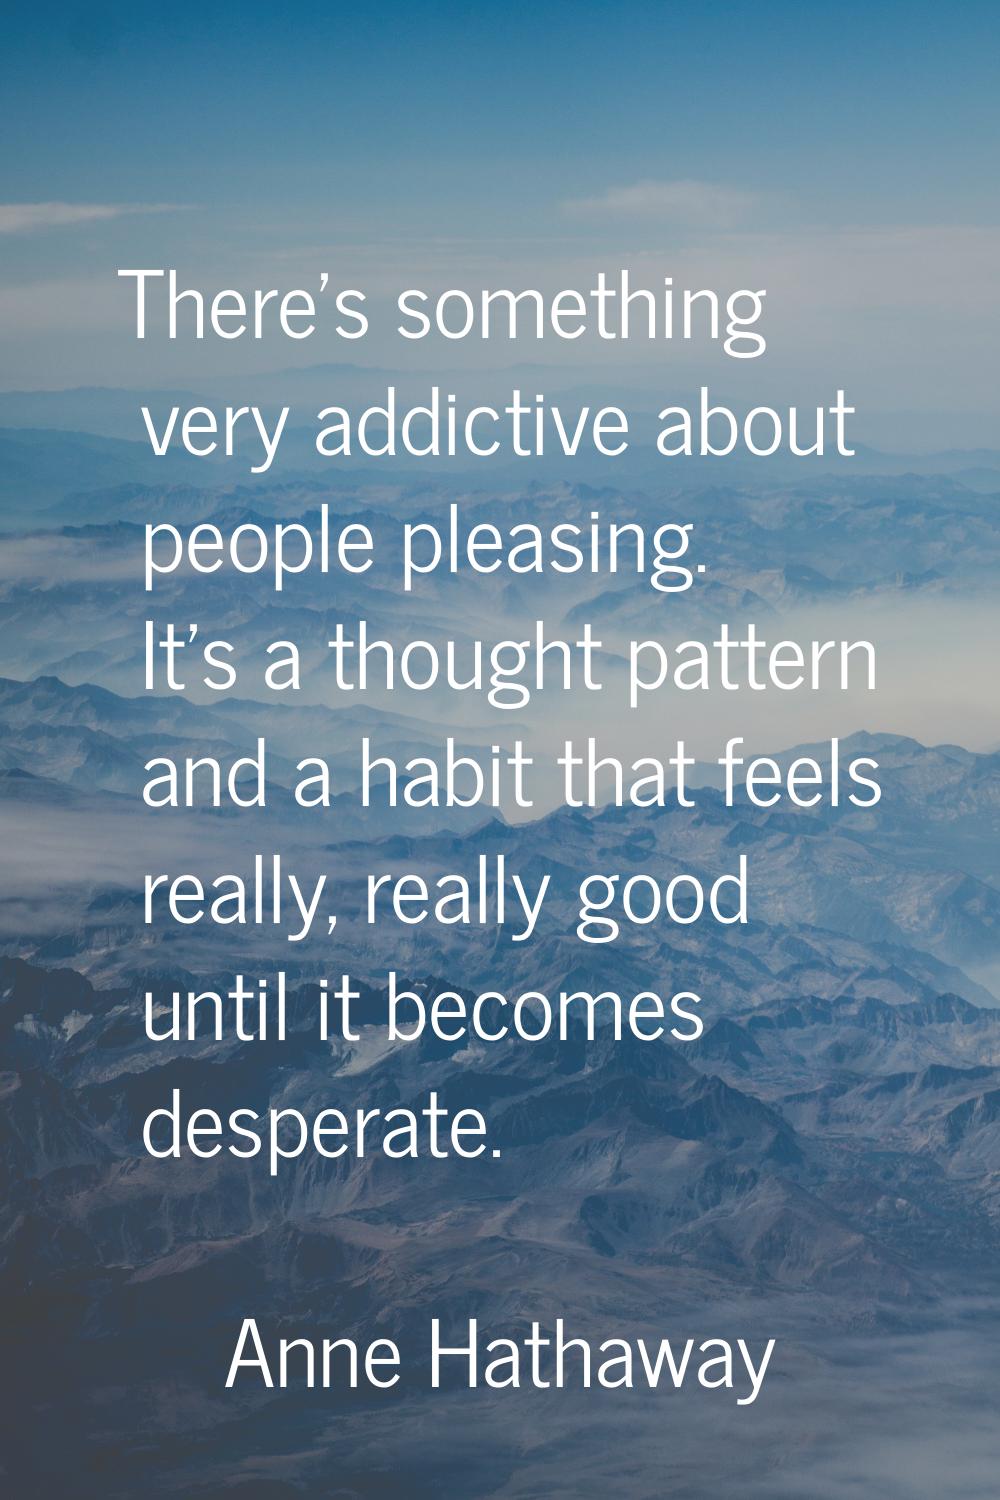 There's something very addictive about people pleasing. It's a thought pattern and a habit that fee